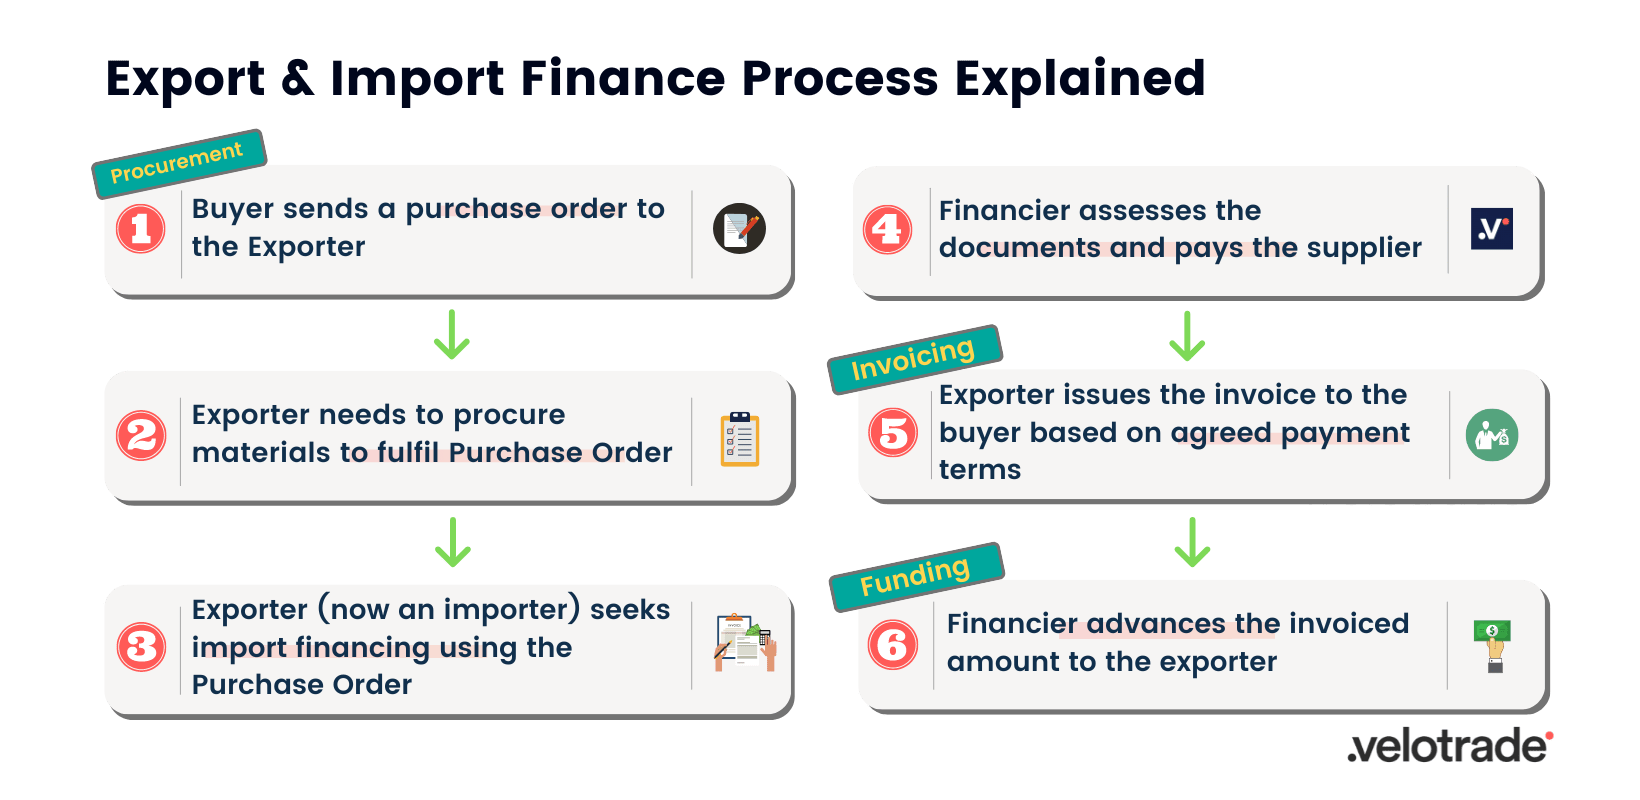 The export and Import Finance process flow in 6 steps.